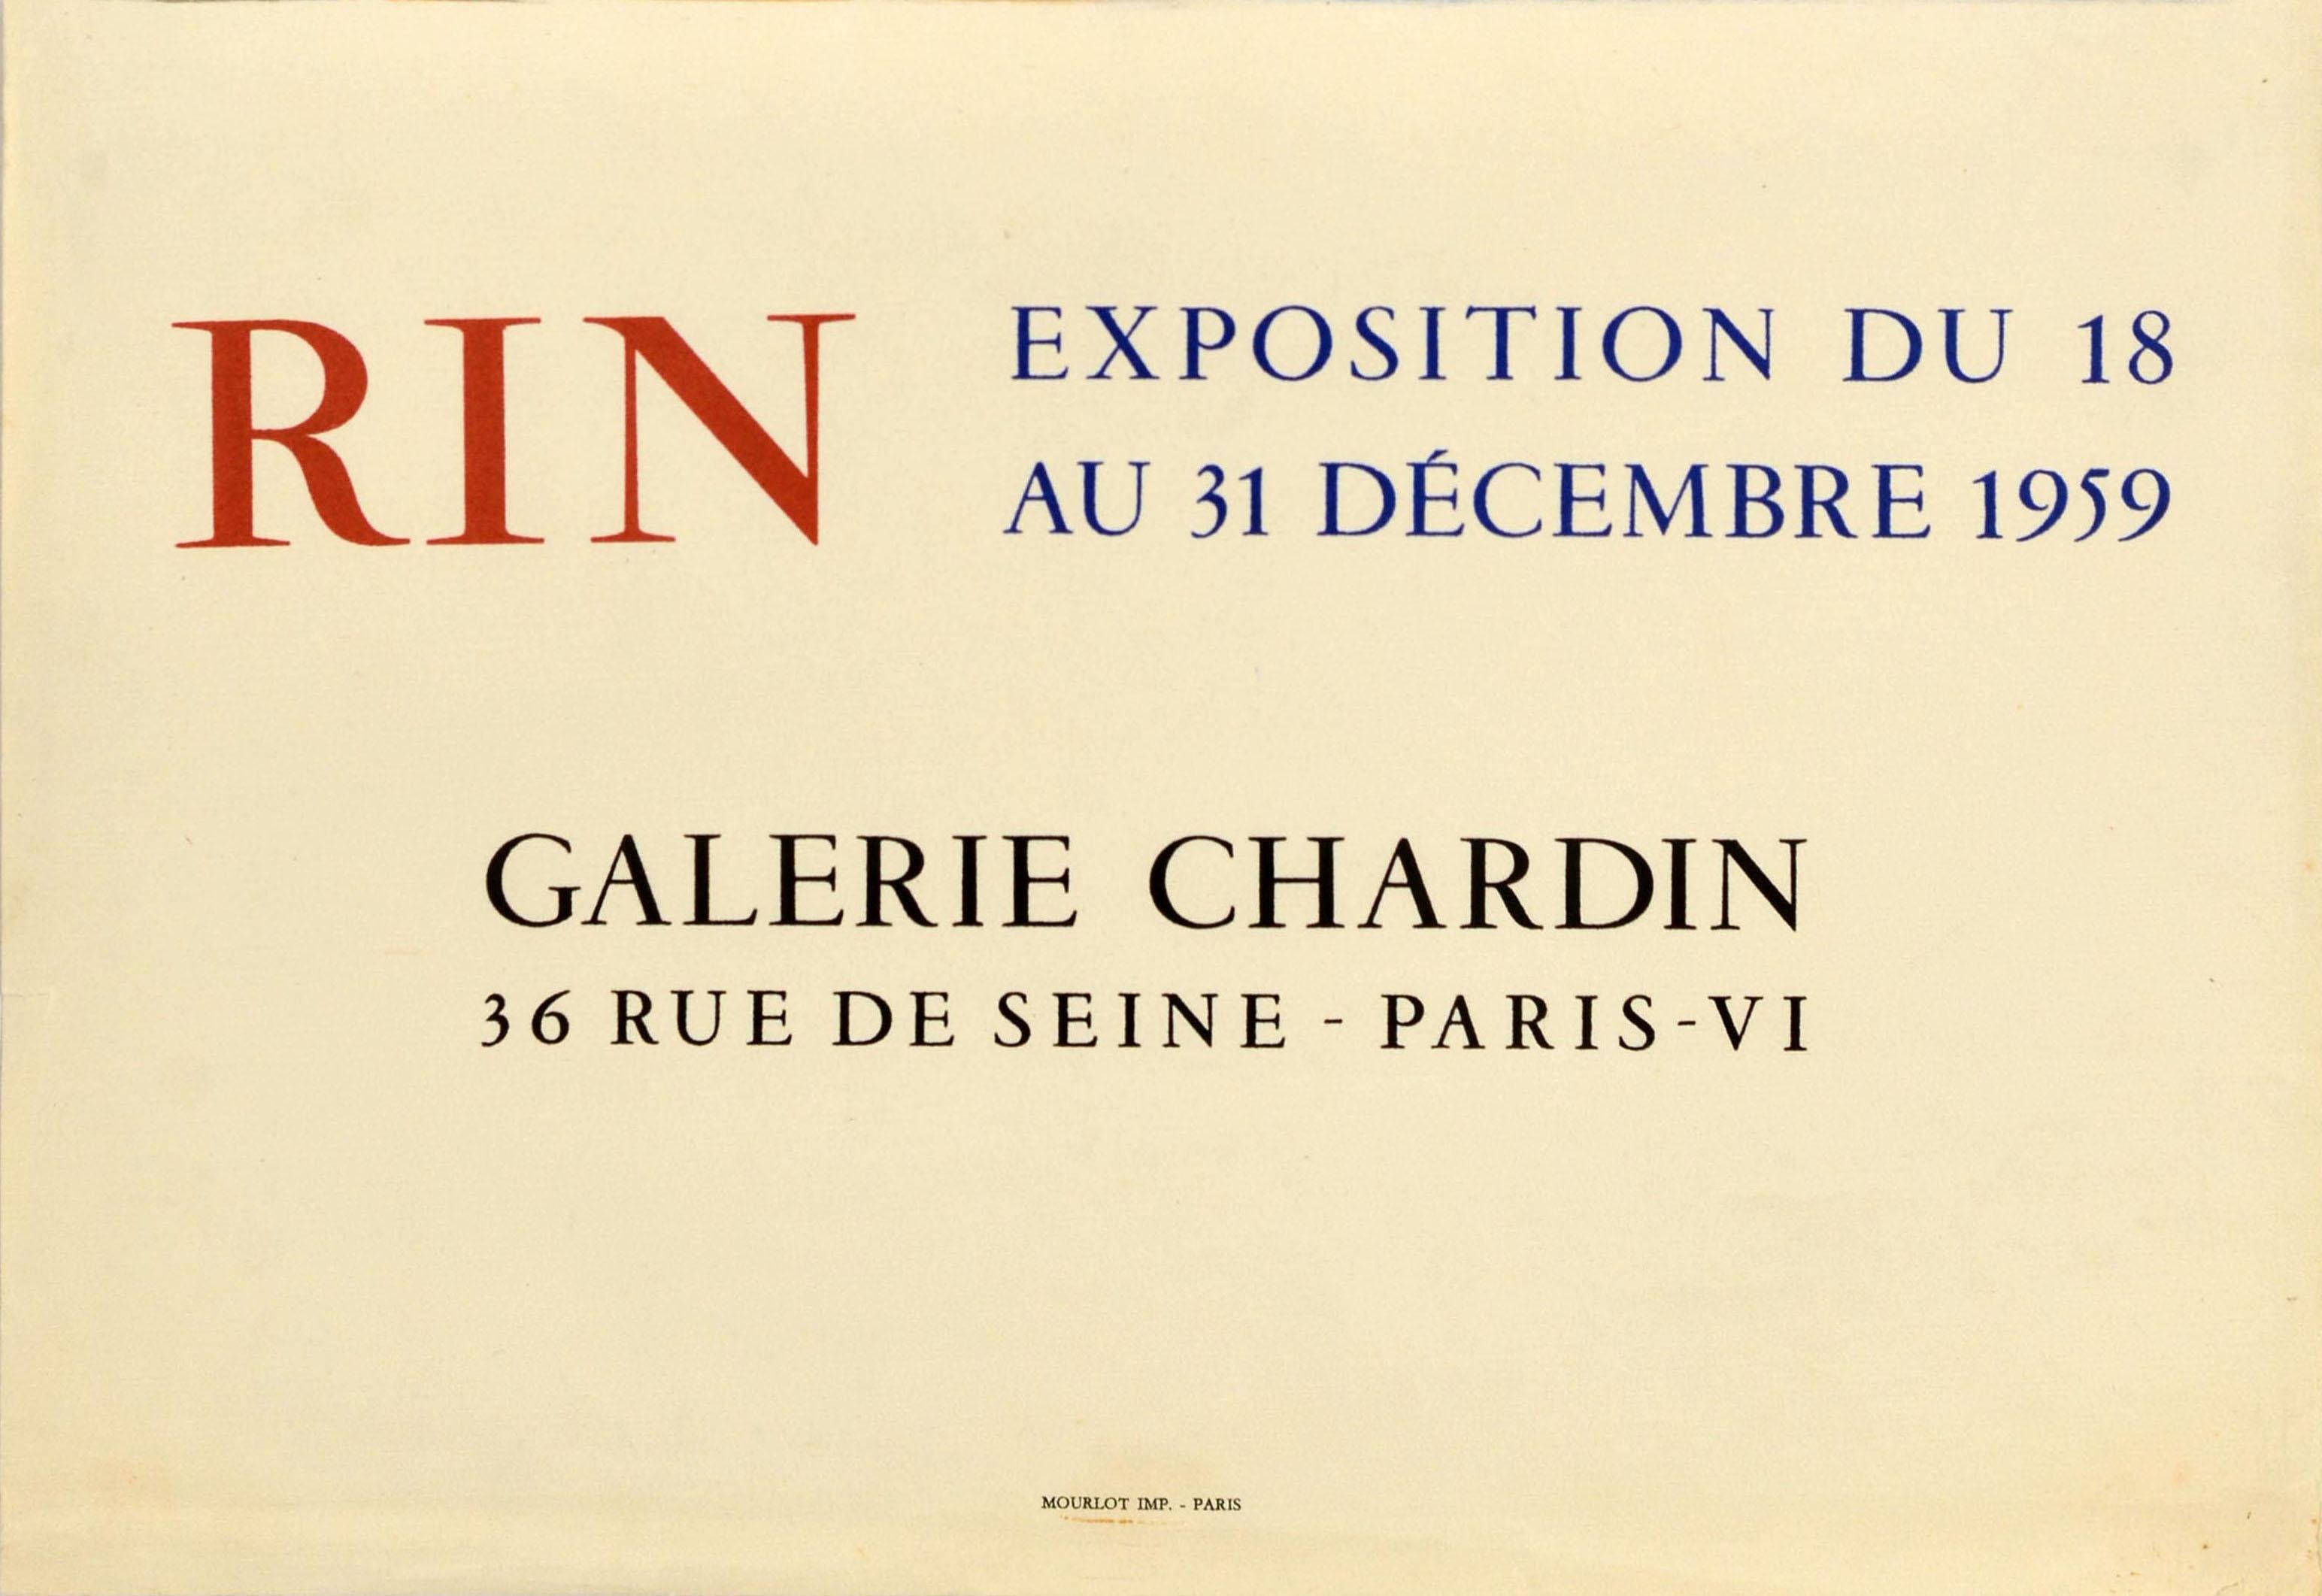 Original vintage art exhibition poster - Rin Galerie Chardin - held in Paris from 18 to 31 December 1959, featuring a colourful abstract painting by Nicolas Rin (b 1919) with shapes resembling buildings, the bold title and information text on the